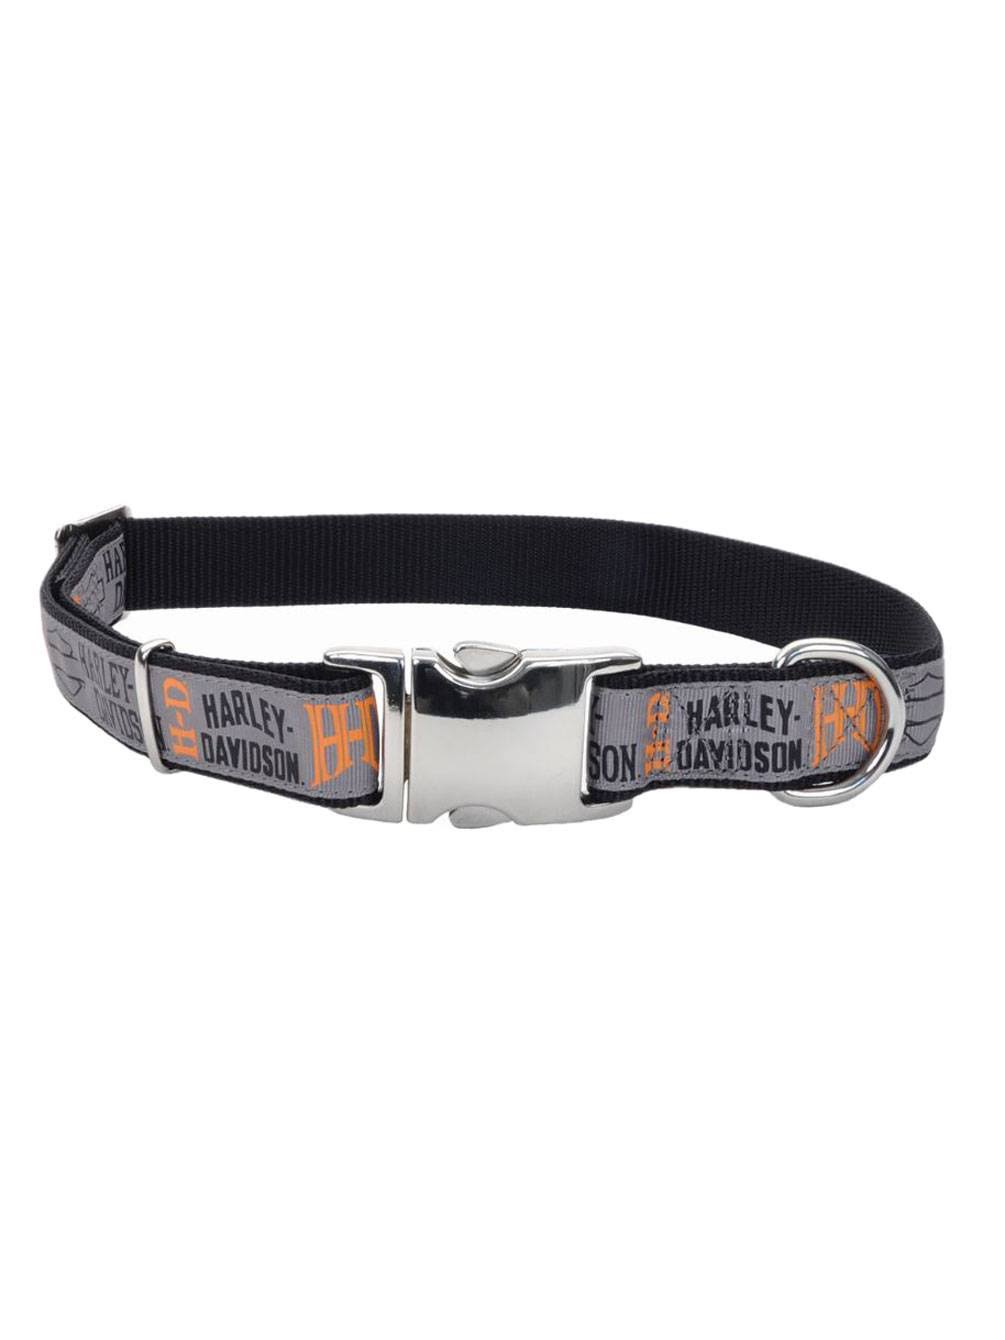 Harley-Davidson 1.6cm Adjustable Ribbon Pet Collar - X-Small 30cm . H6471HHLG12, Harley Davidson | Dogs | Delivery Guaranteed | Best Price Guarantee